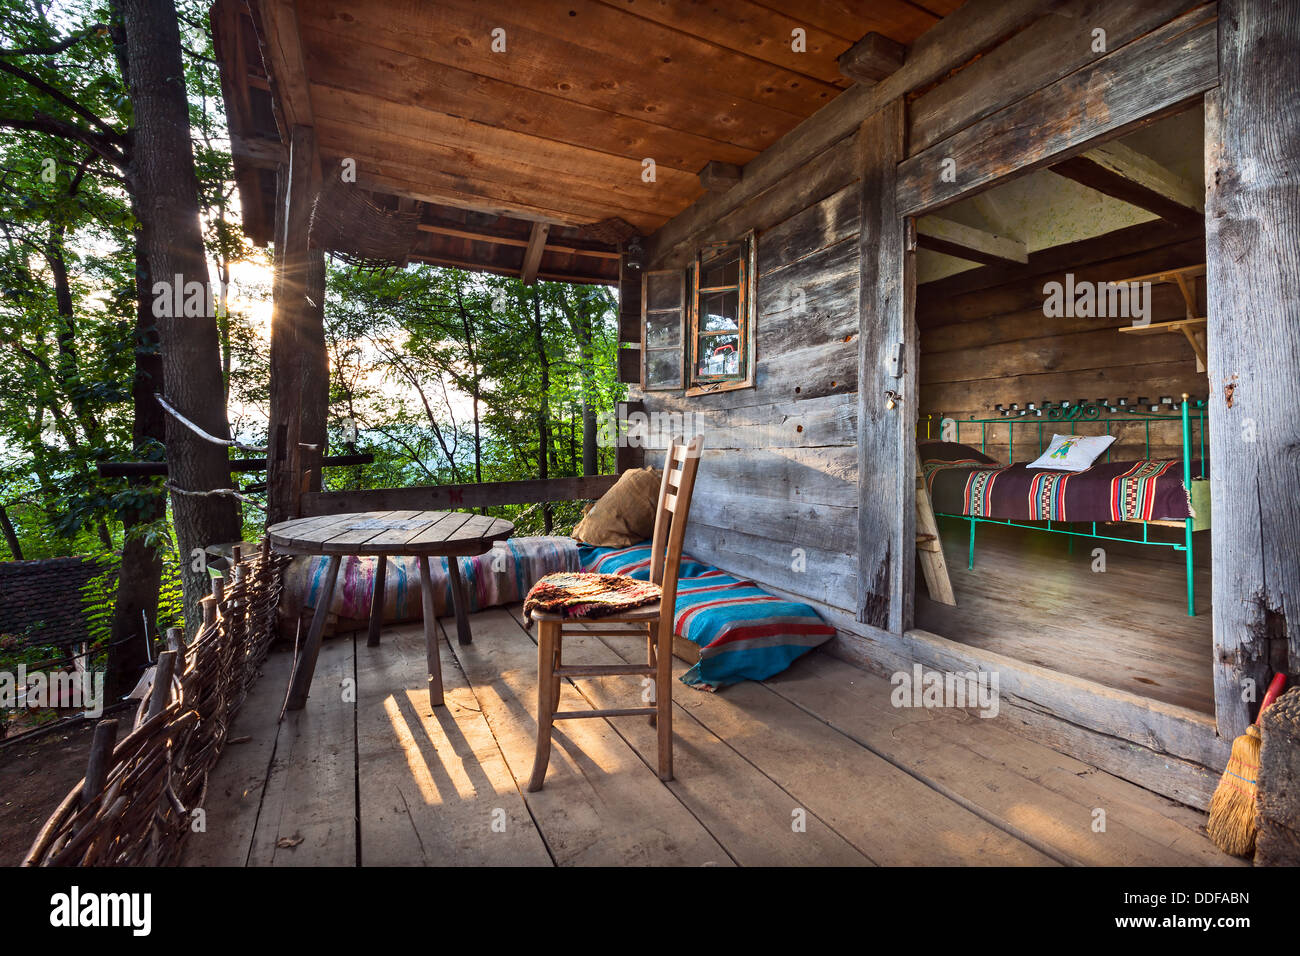 Wooden house in forest, house made of natural materials. Stock Photo